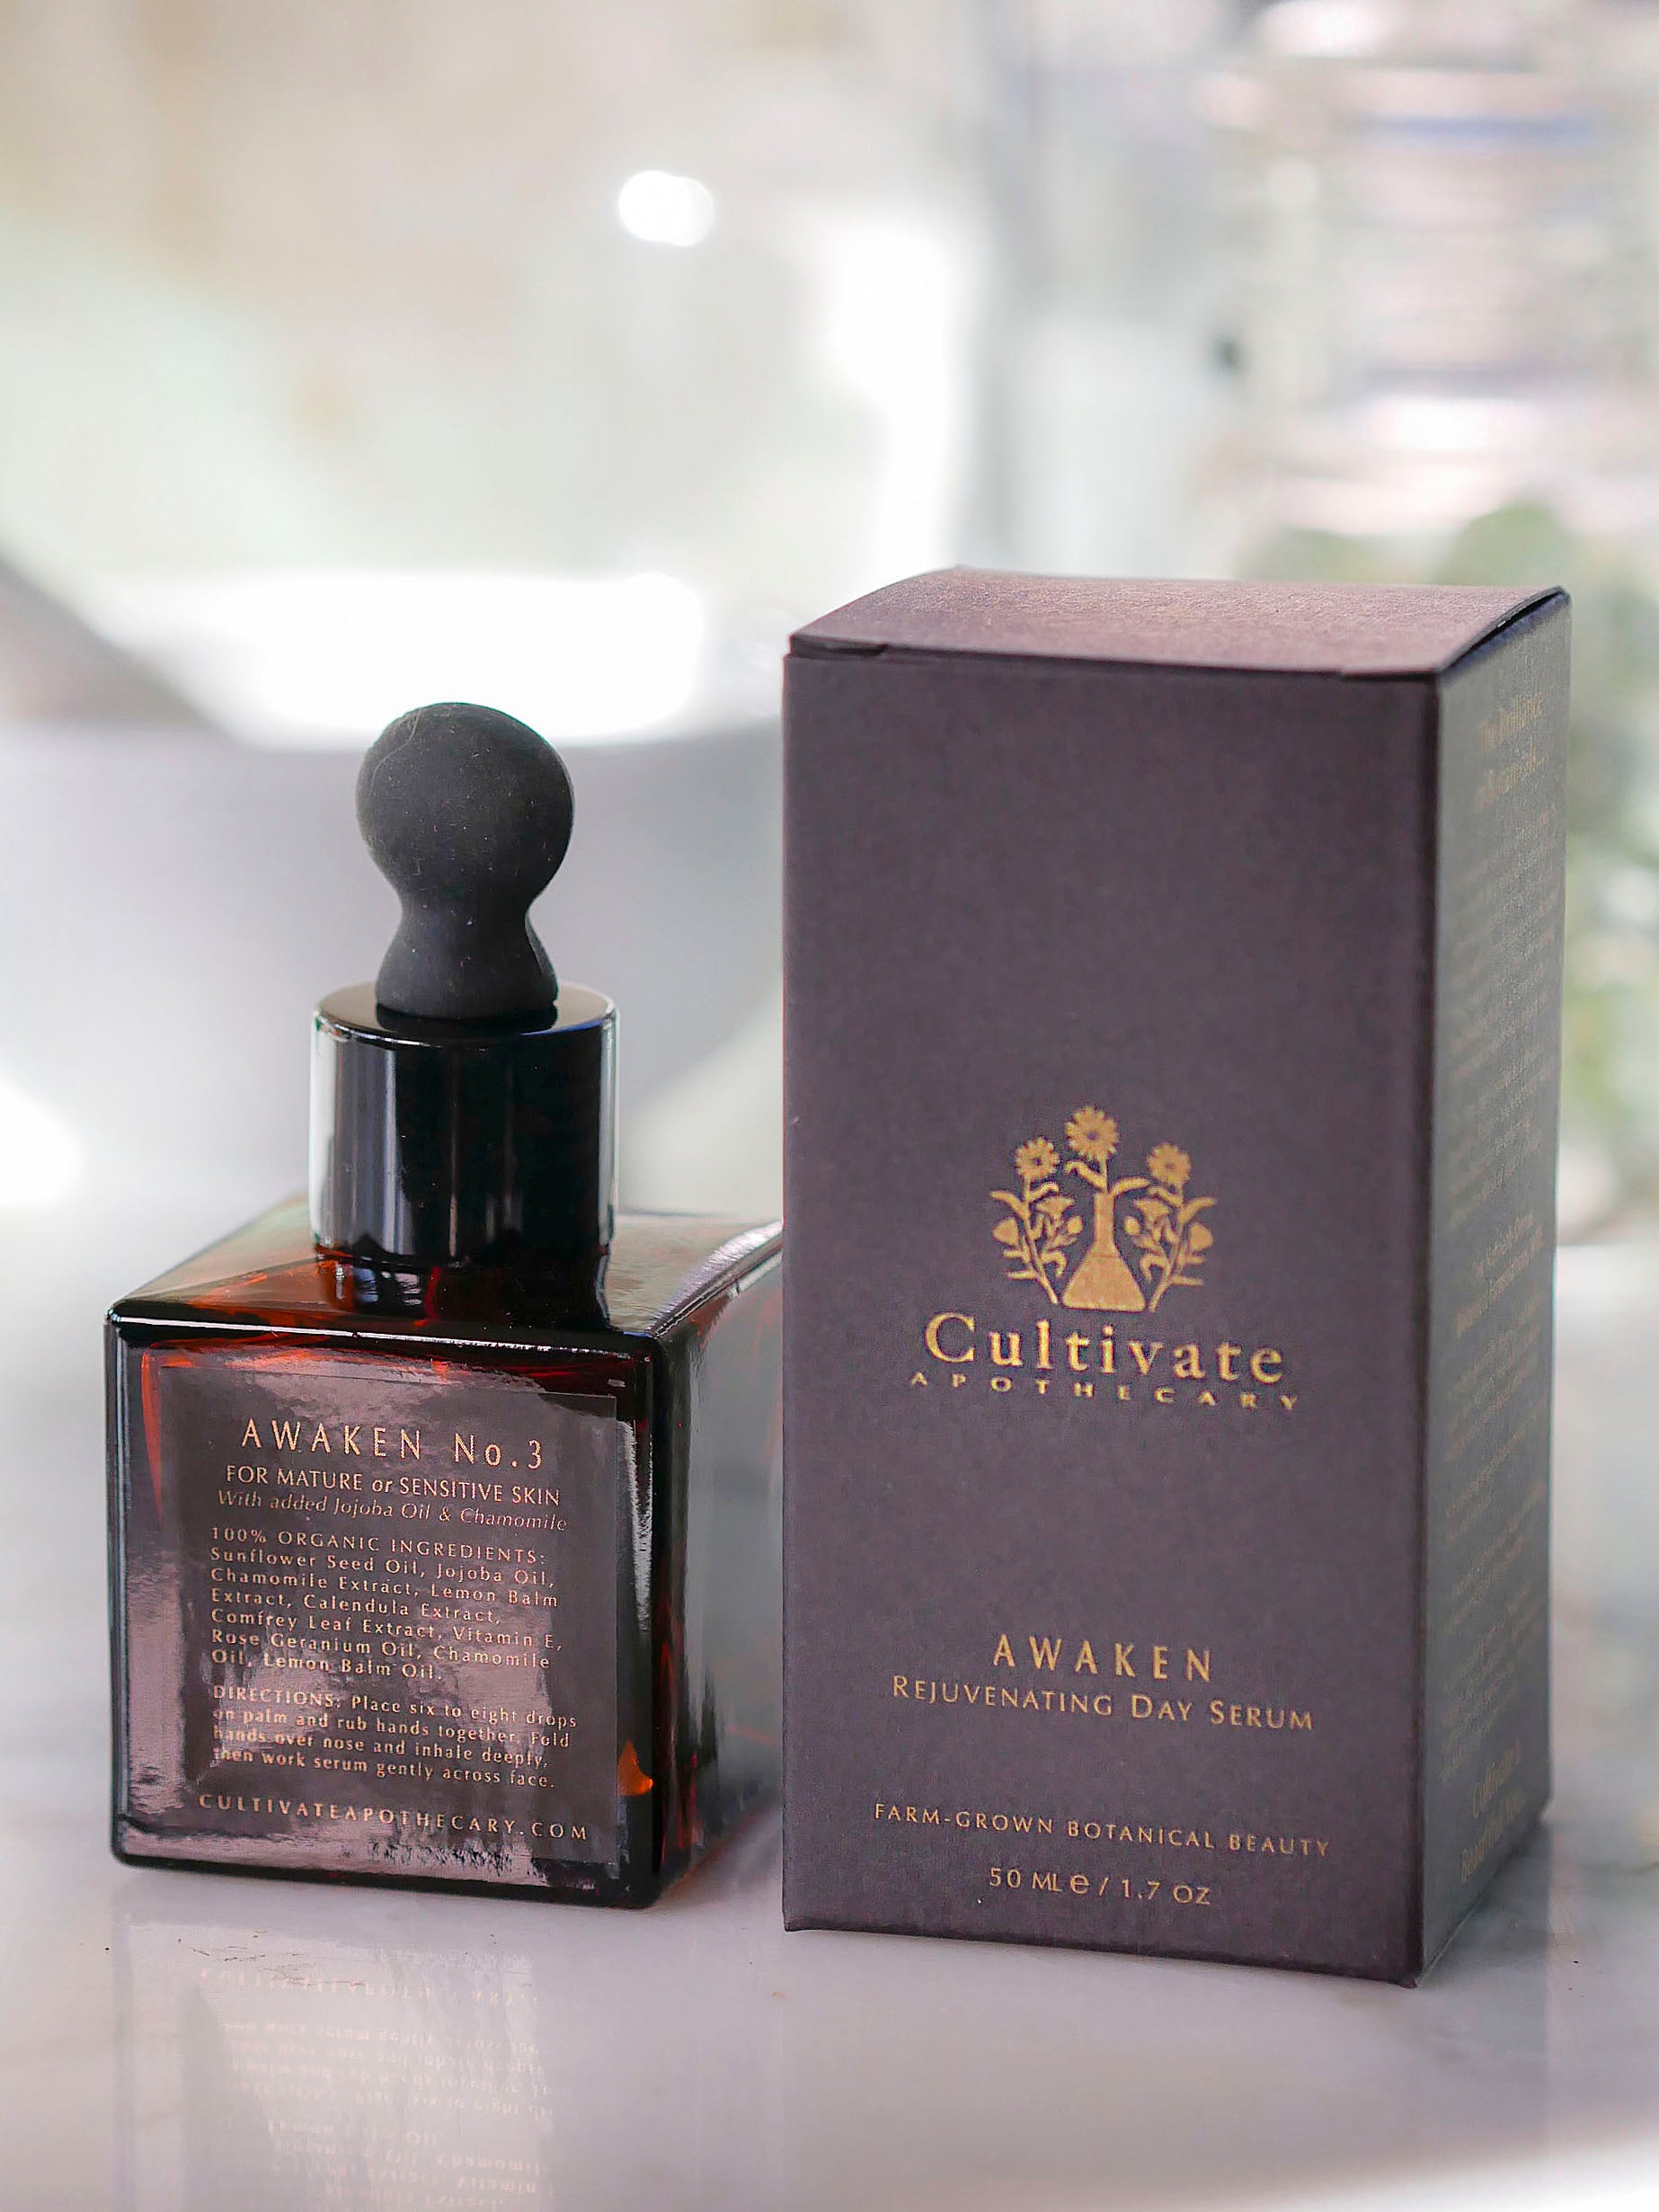 Best serum for sensitive skin by Cultivate Apothecary.